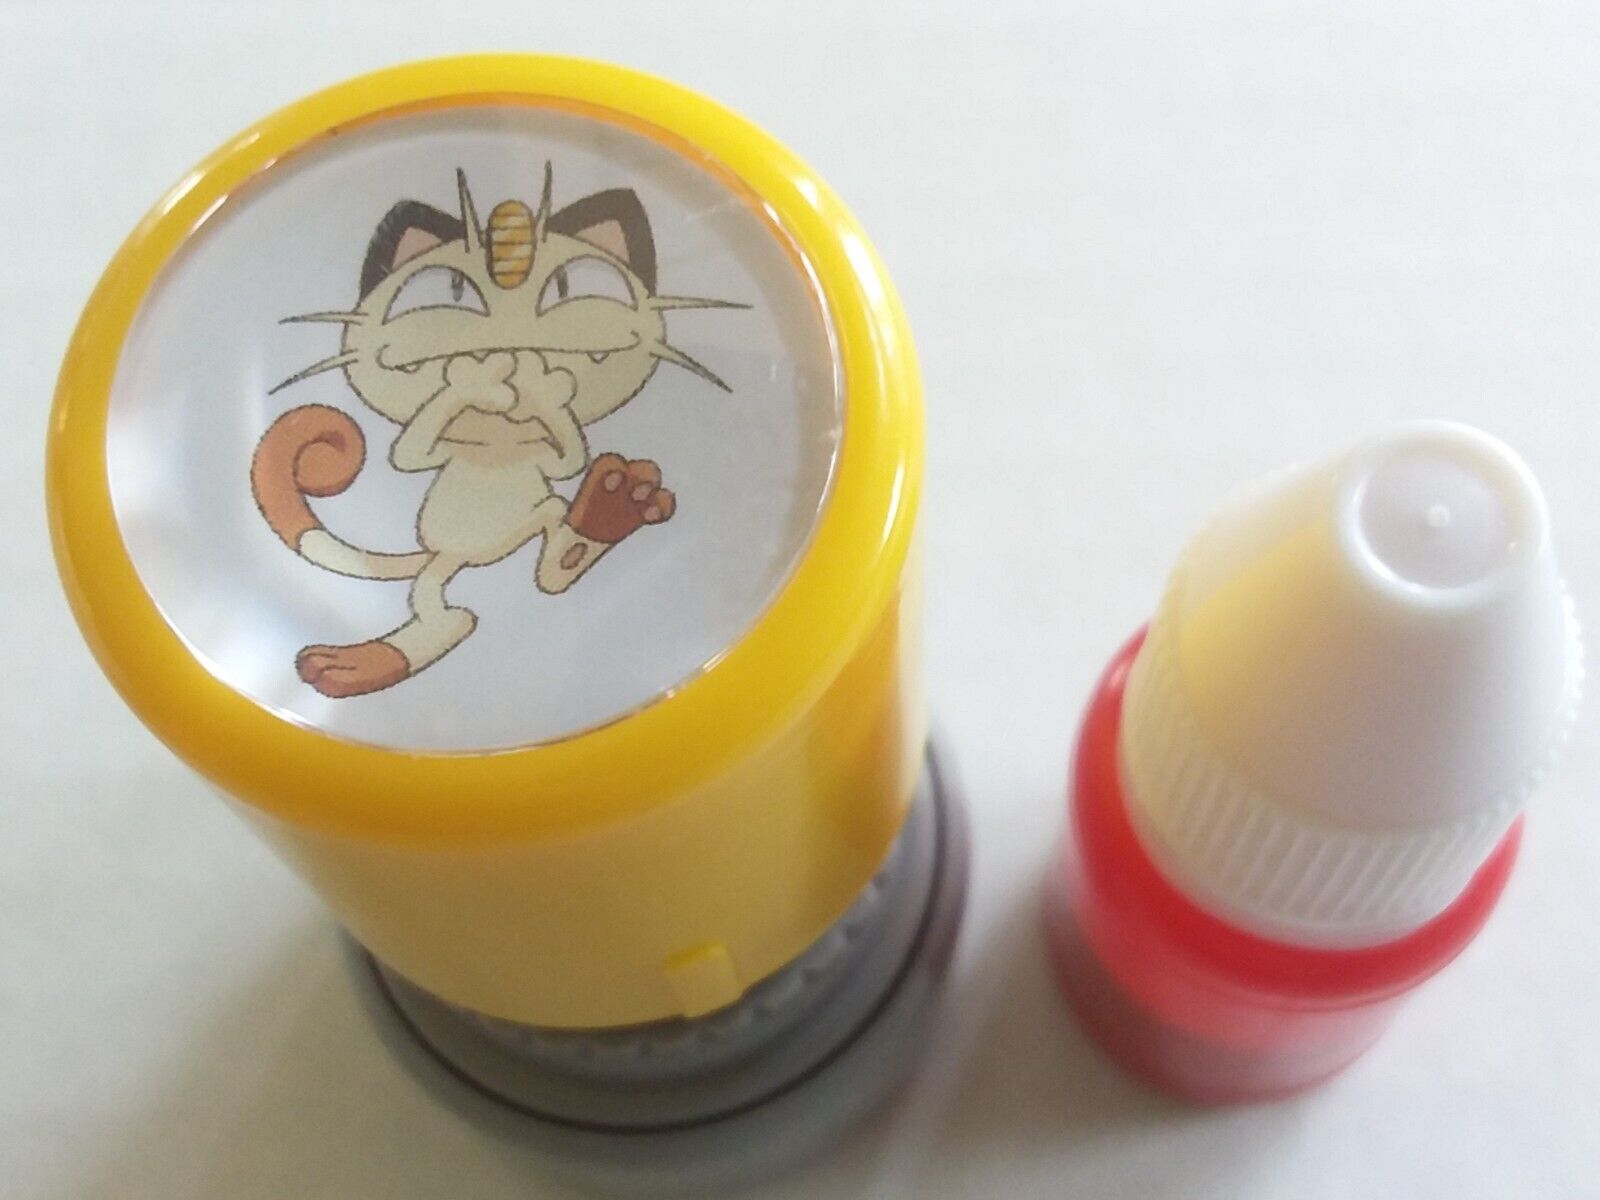 Pokemon ink rubber stamp Meowth 2cm with red ink bottle